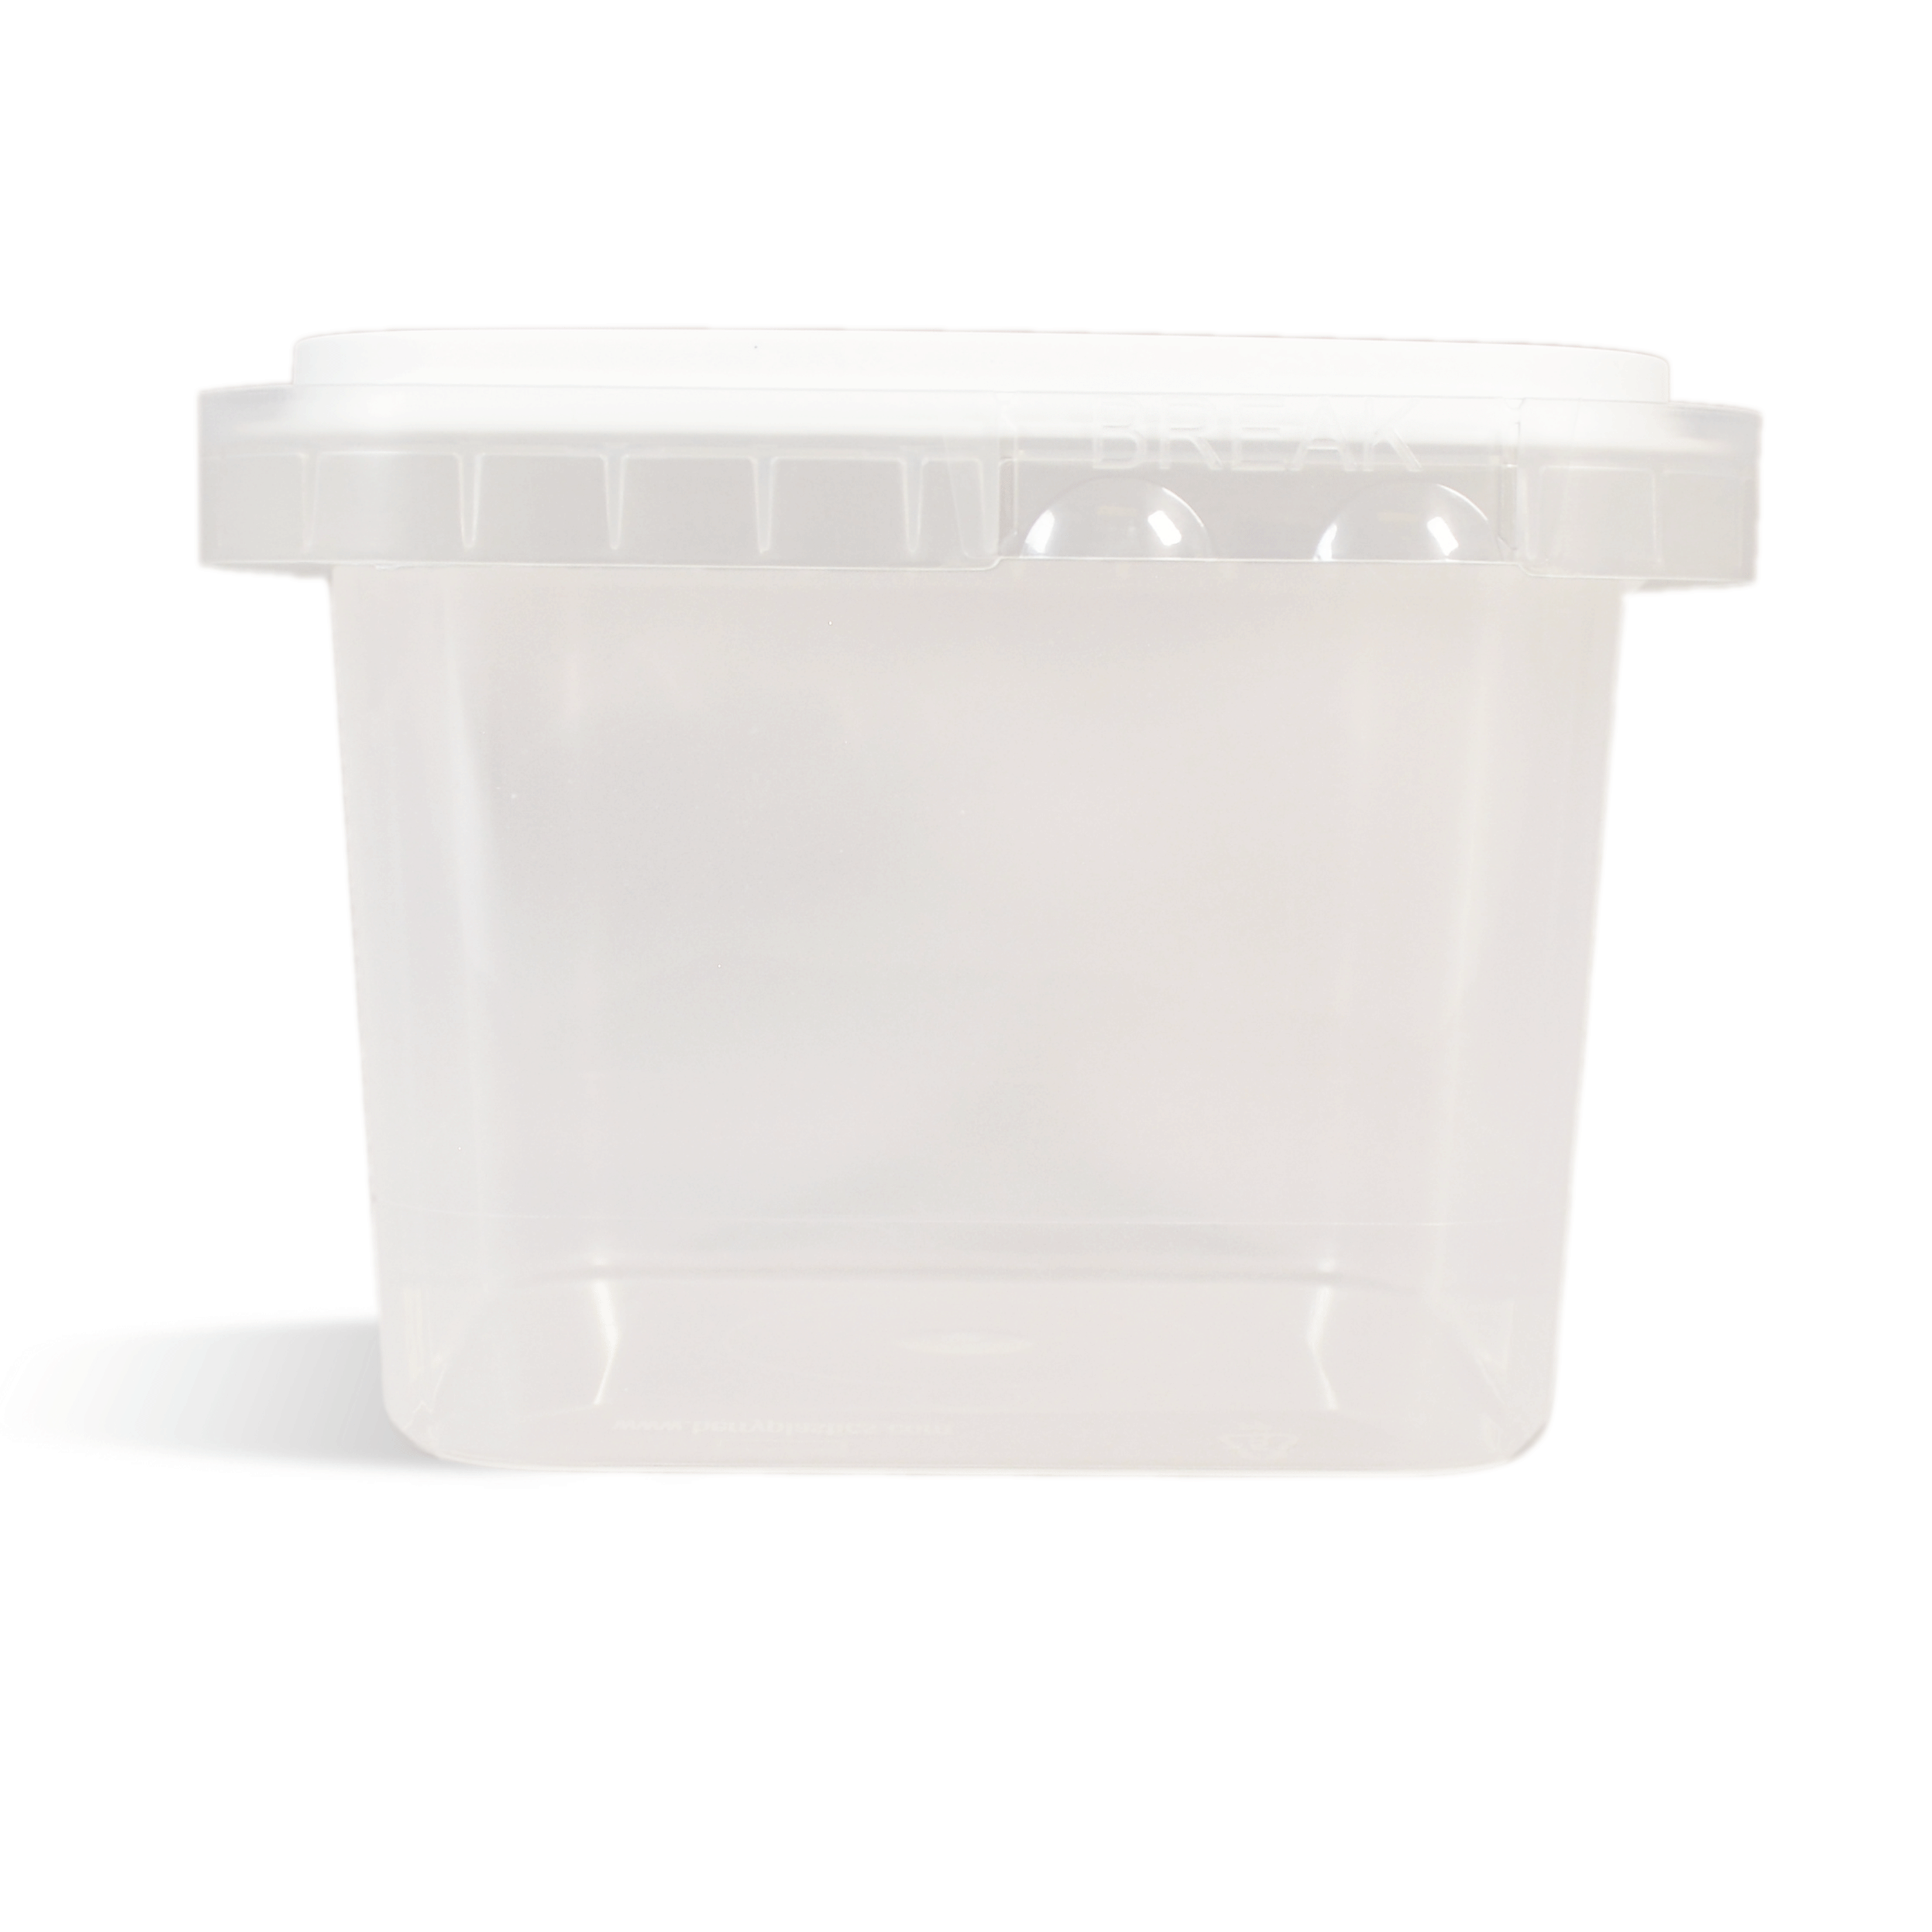 Square Tub w/ Tamper Evident Lid - 16 oz Clear Square Container – NorthWood  Distributing